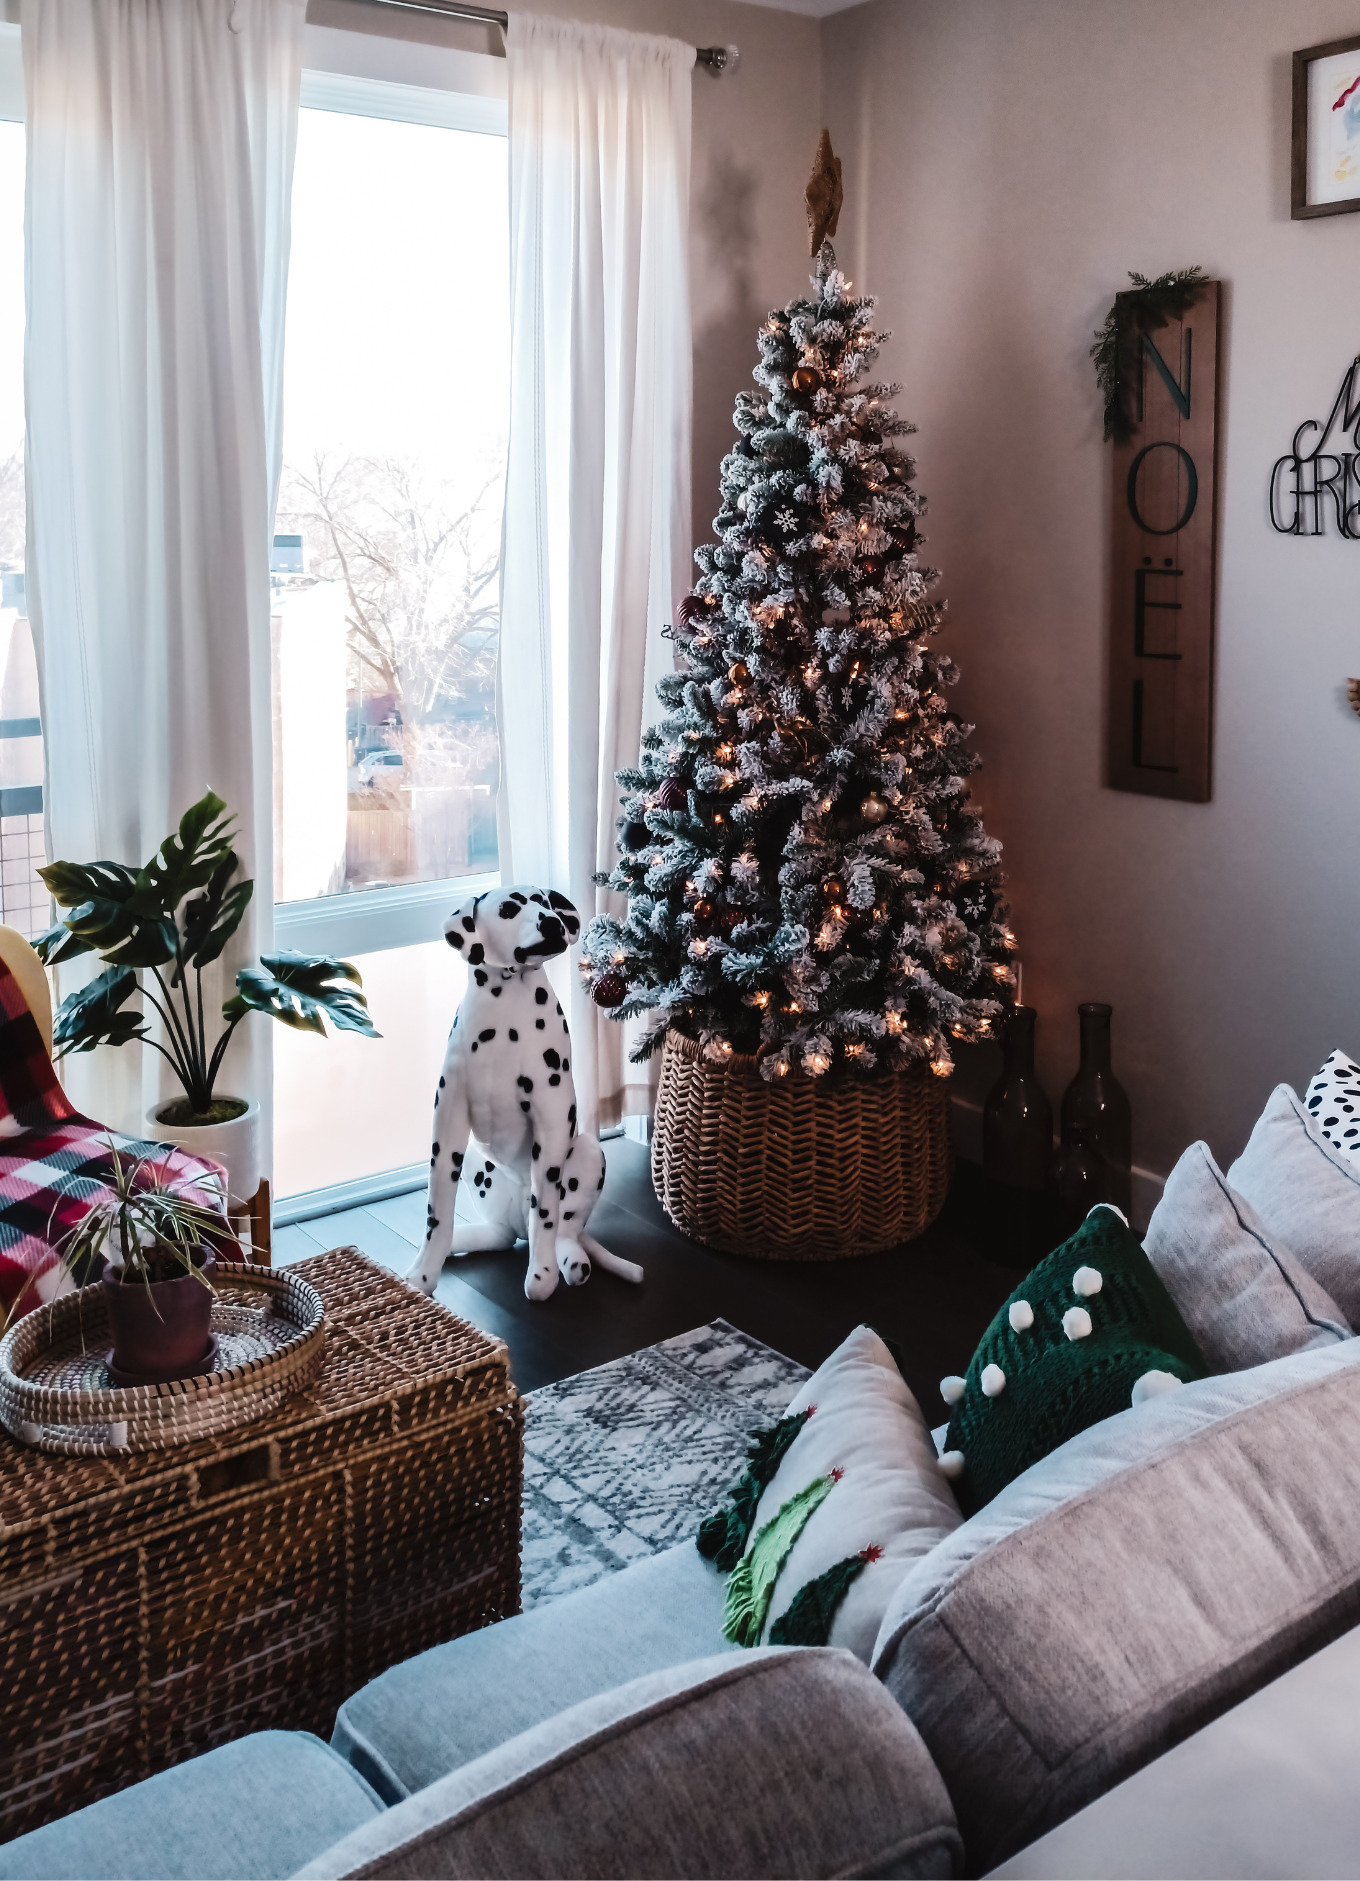 A surefire way to make a small apartment feel Christmasy is to add tiny, but memorable holiday accents to the space. This photo features plants, green throw pillows, a stuffed Dalmatian dog and a gorgeous lit Christmas tree with gold, bronze, black and cream-coloured decorations.